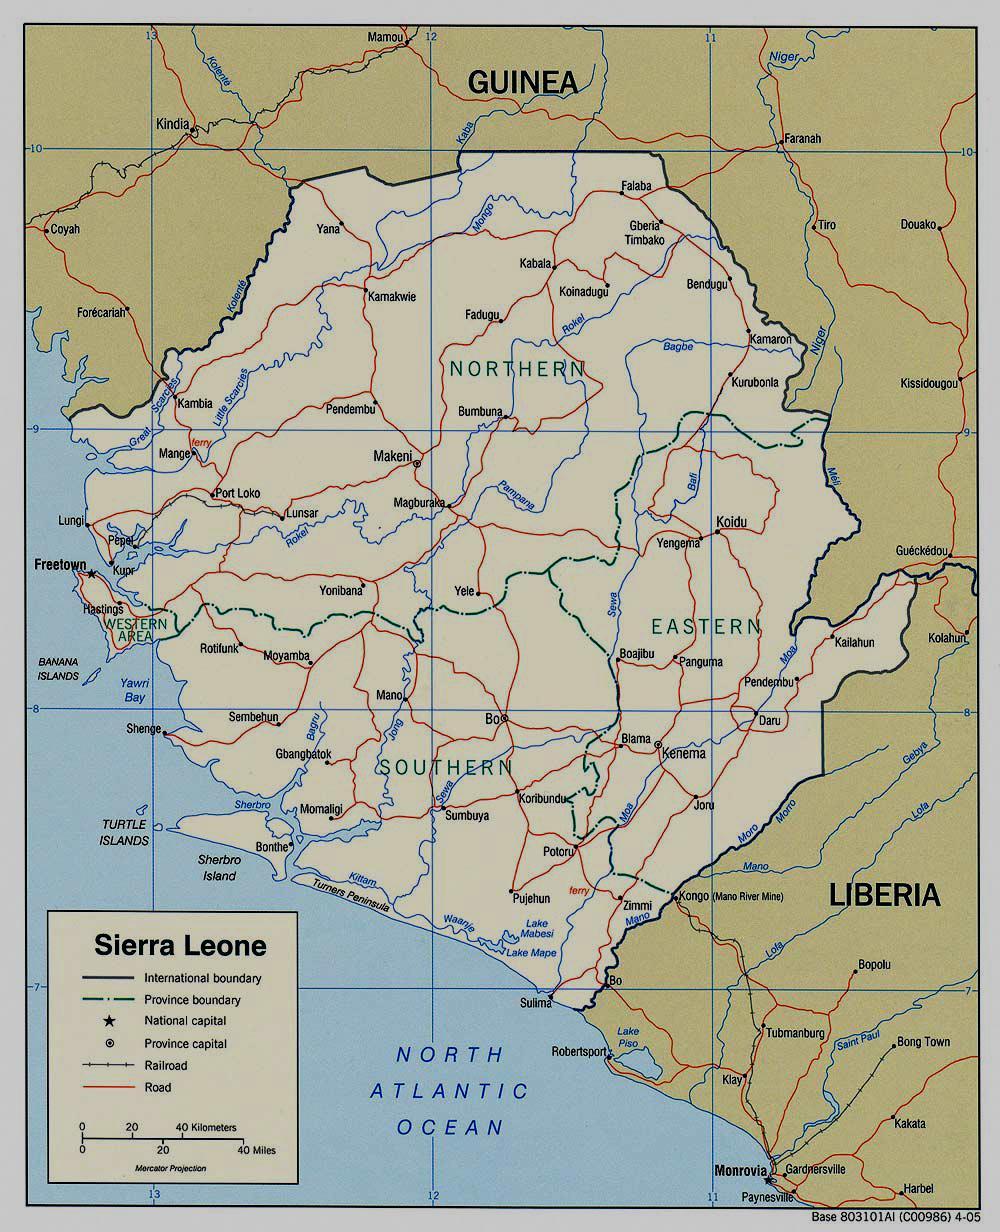 Bordered by Guinea to the northeast, Liberia to the southeast,